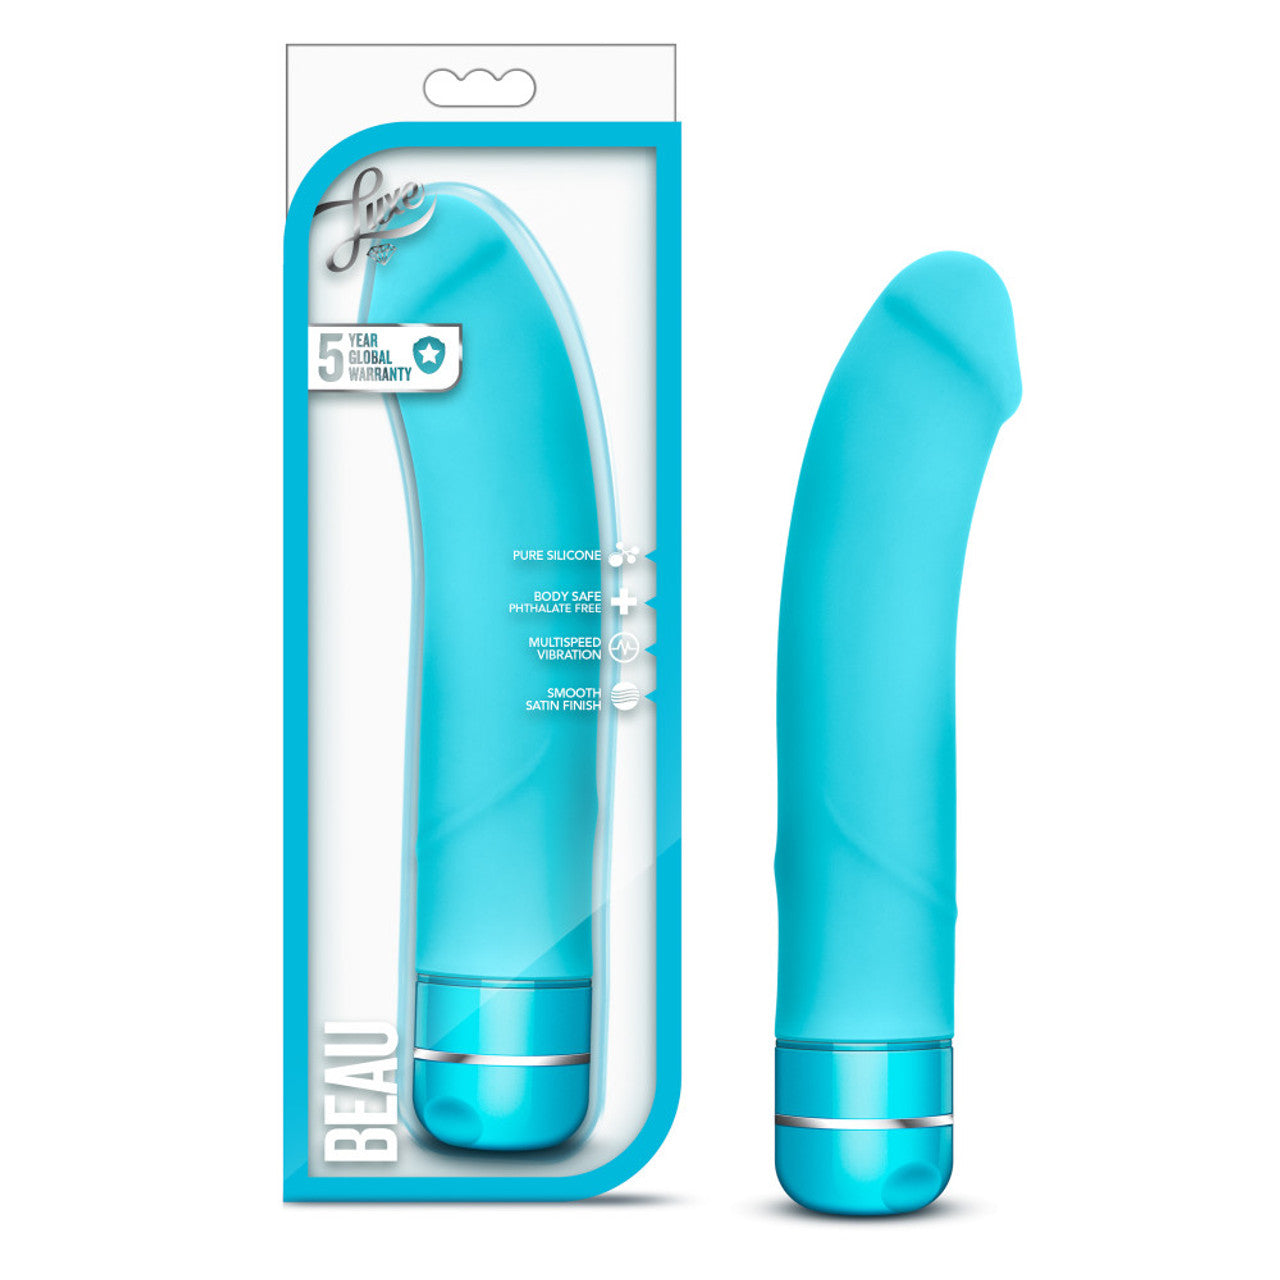 Luxe Beau Silicone G-Spot Vibrator - Blue - Thorn & Feather